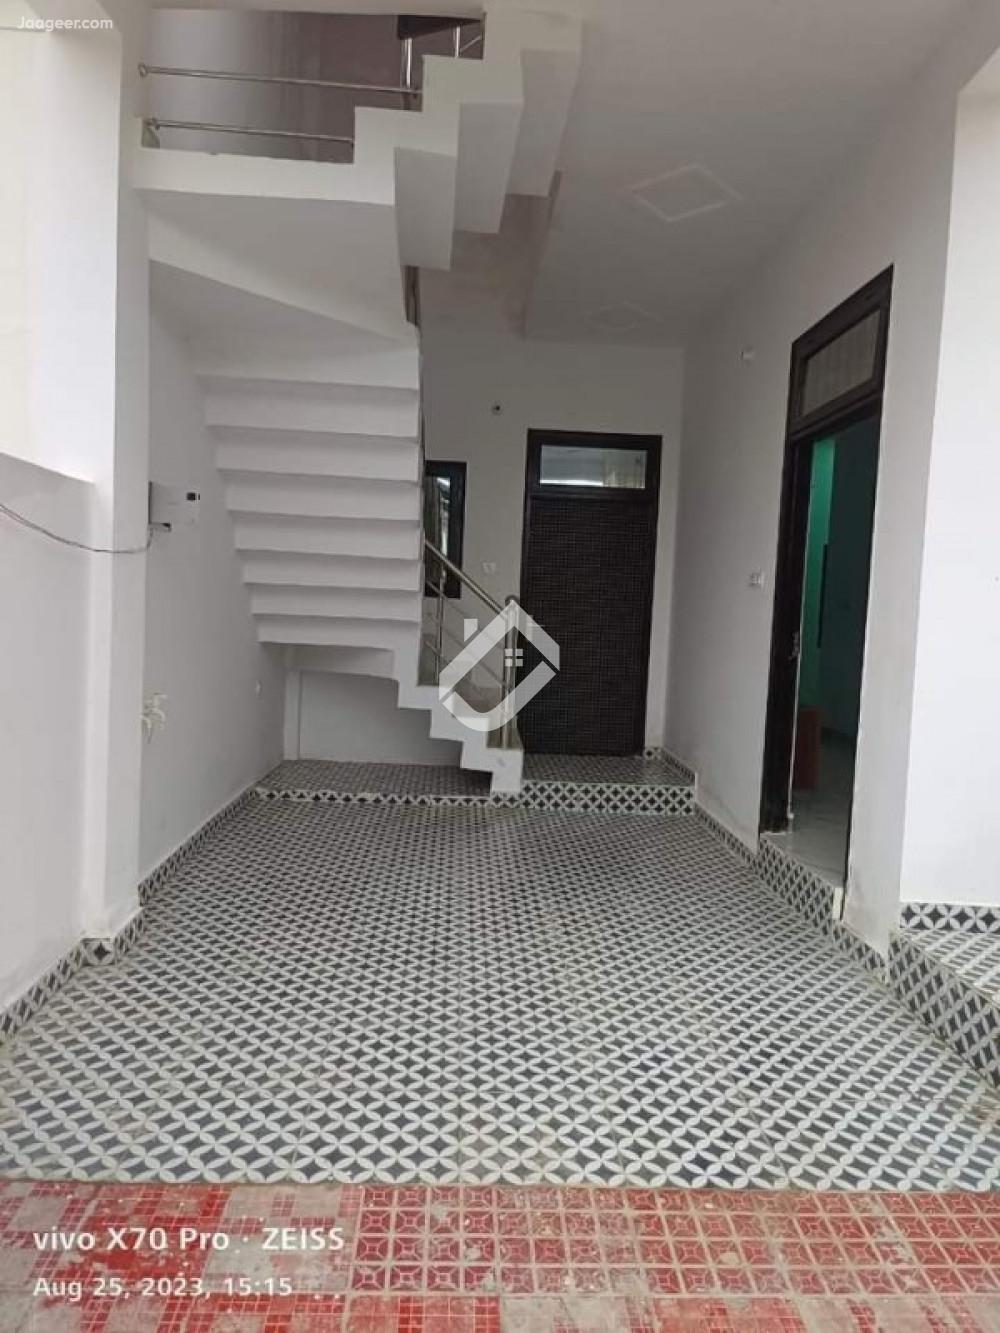 View  5 Marla Double Storey Corner House For Sale In Shadab Town Near McDonald's  in Shadab Town, Sargodha